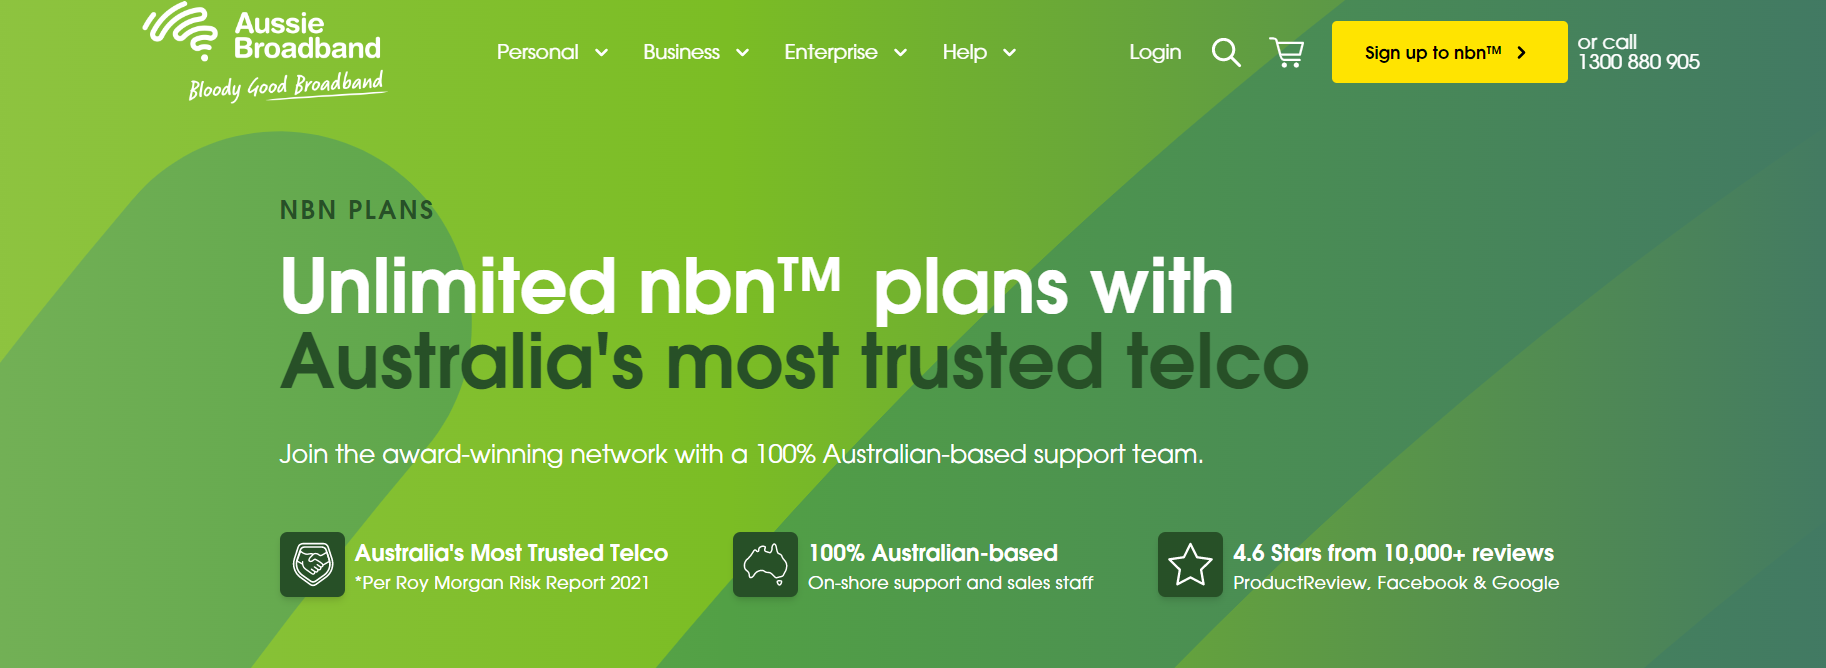 Shh, Get $10 OFF/month on 12 month NBN plans for new customers with promo code at Aussie Broadband